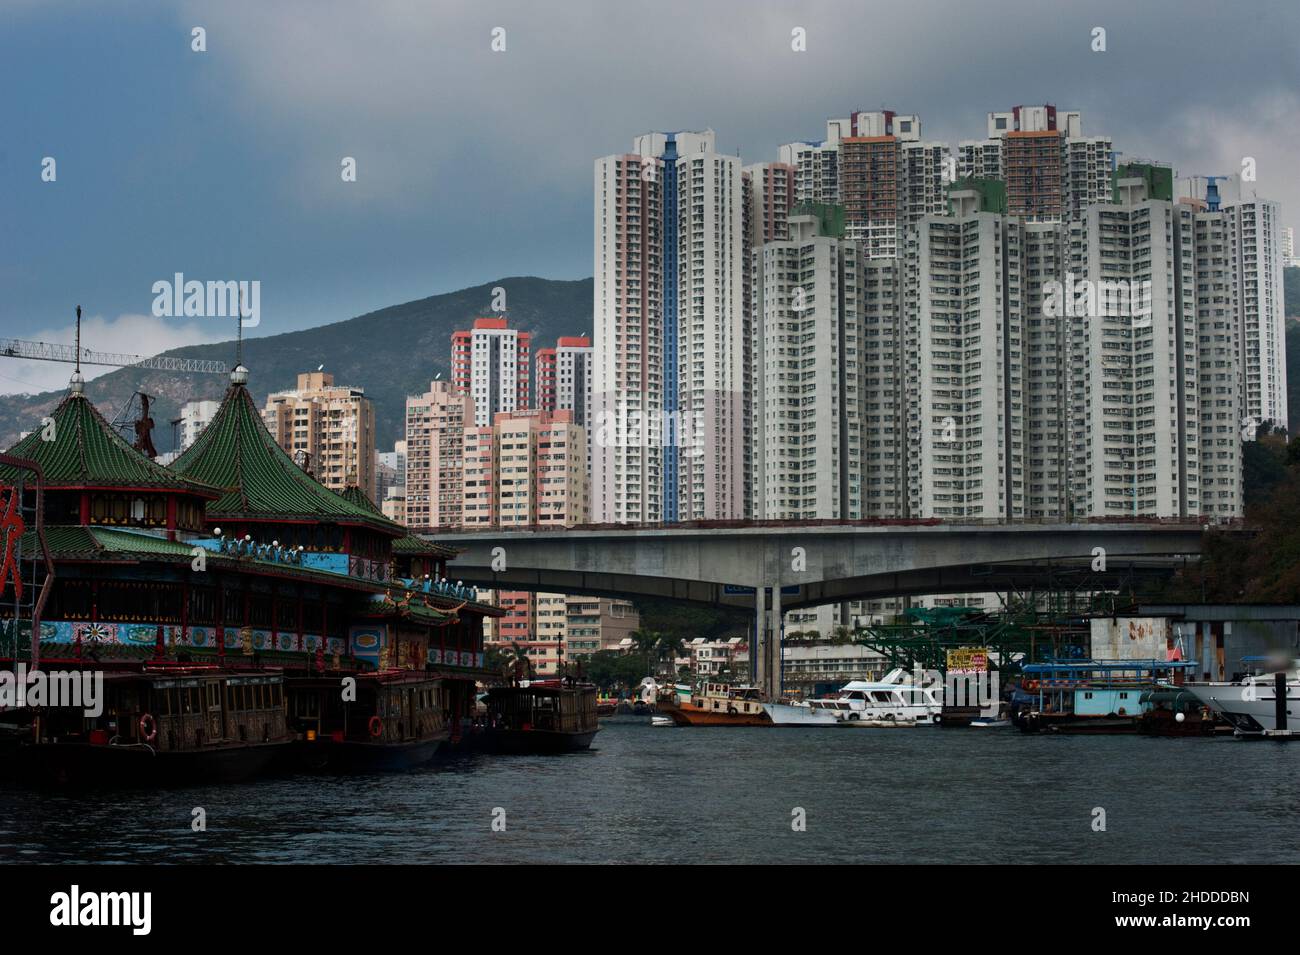 Jumbo Kingdom, a floating restaurant, with the scenery of Aberdeen Floating Village and tower blocks behind, Hong Kong. Stock Photo